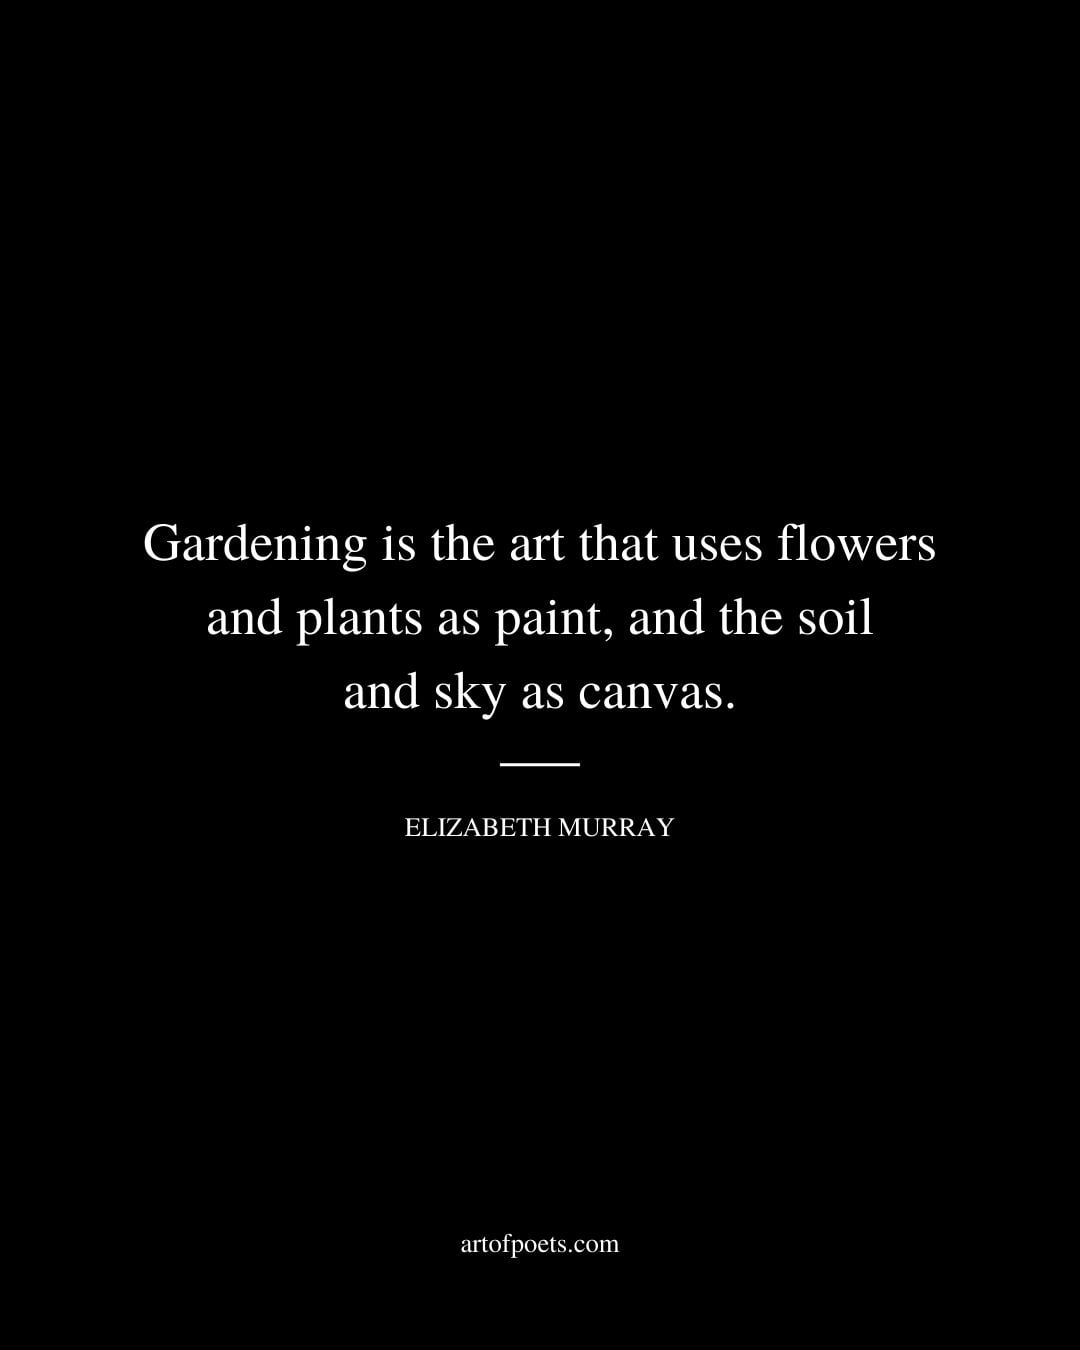 Gardening is the art that uses flowers and plants as paint and the soil and sky as canvas. Elizabeth Murray